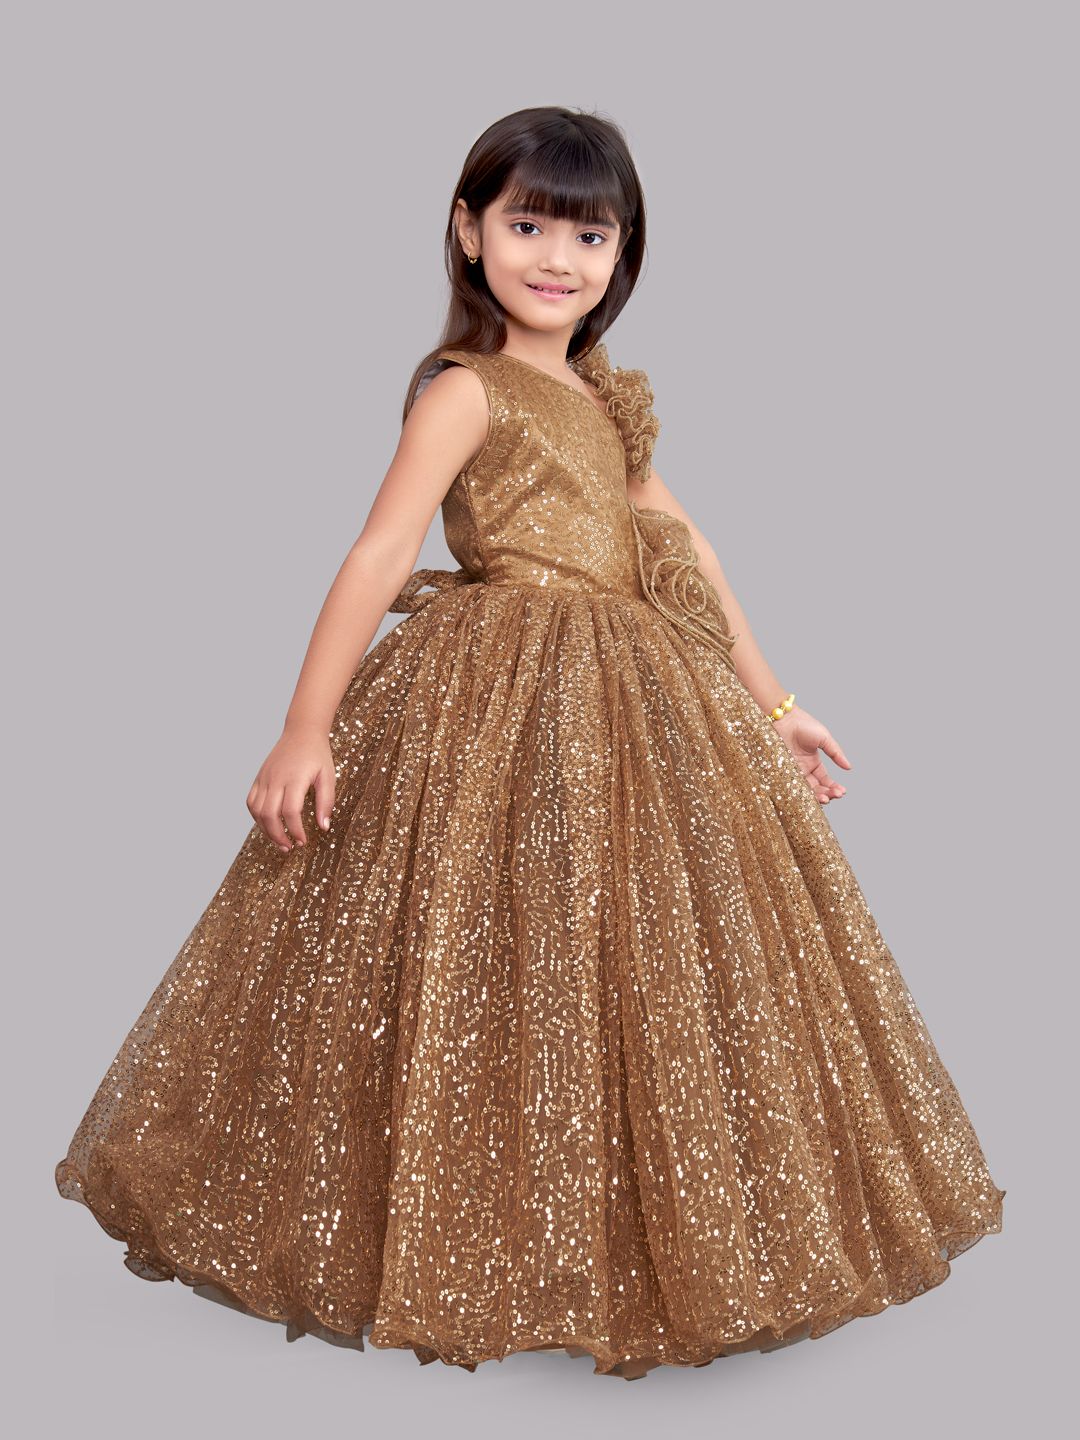 Flower Girl Dresses For Weddings Appliques Gold Lace Girls Pageant Dresses  Floor Length Kids Formal Wear Party Gown First Communion Dresses From  Lrjandy7, $65.33 | DHgate.Com